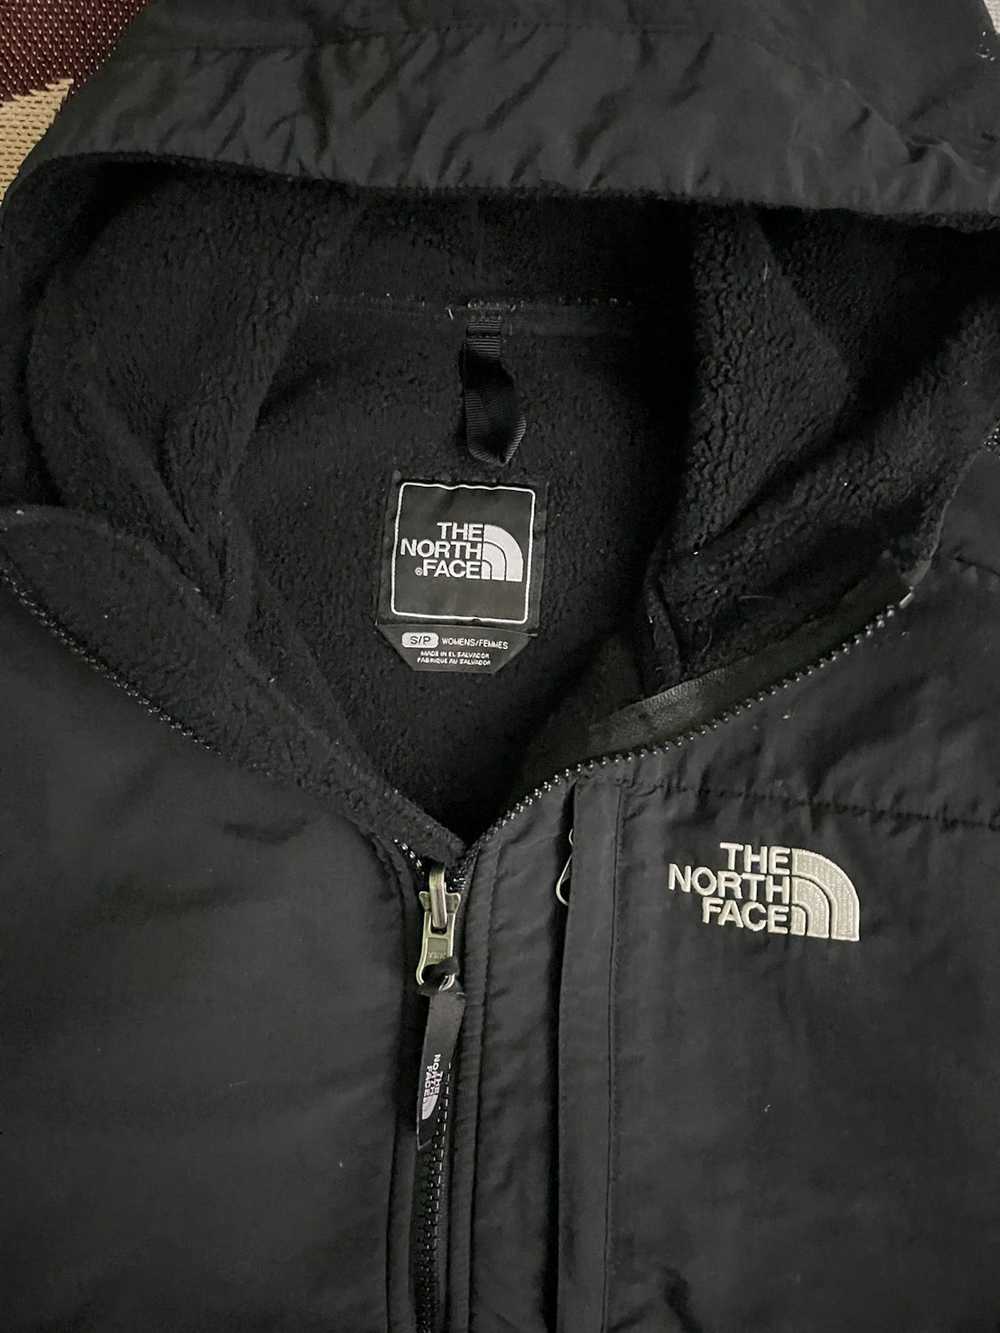 The North Face Women’s The North Face Black Hoode… - image 2